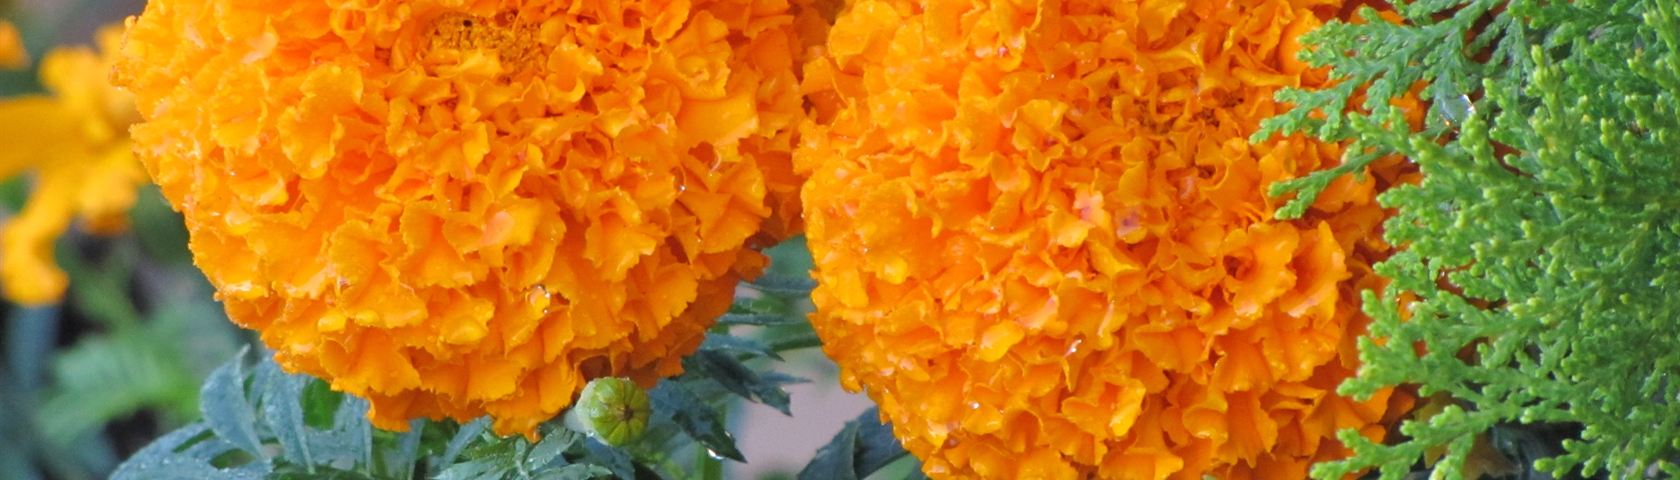 Two Marigolds